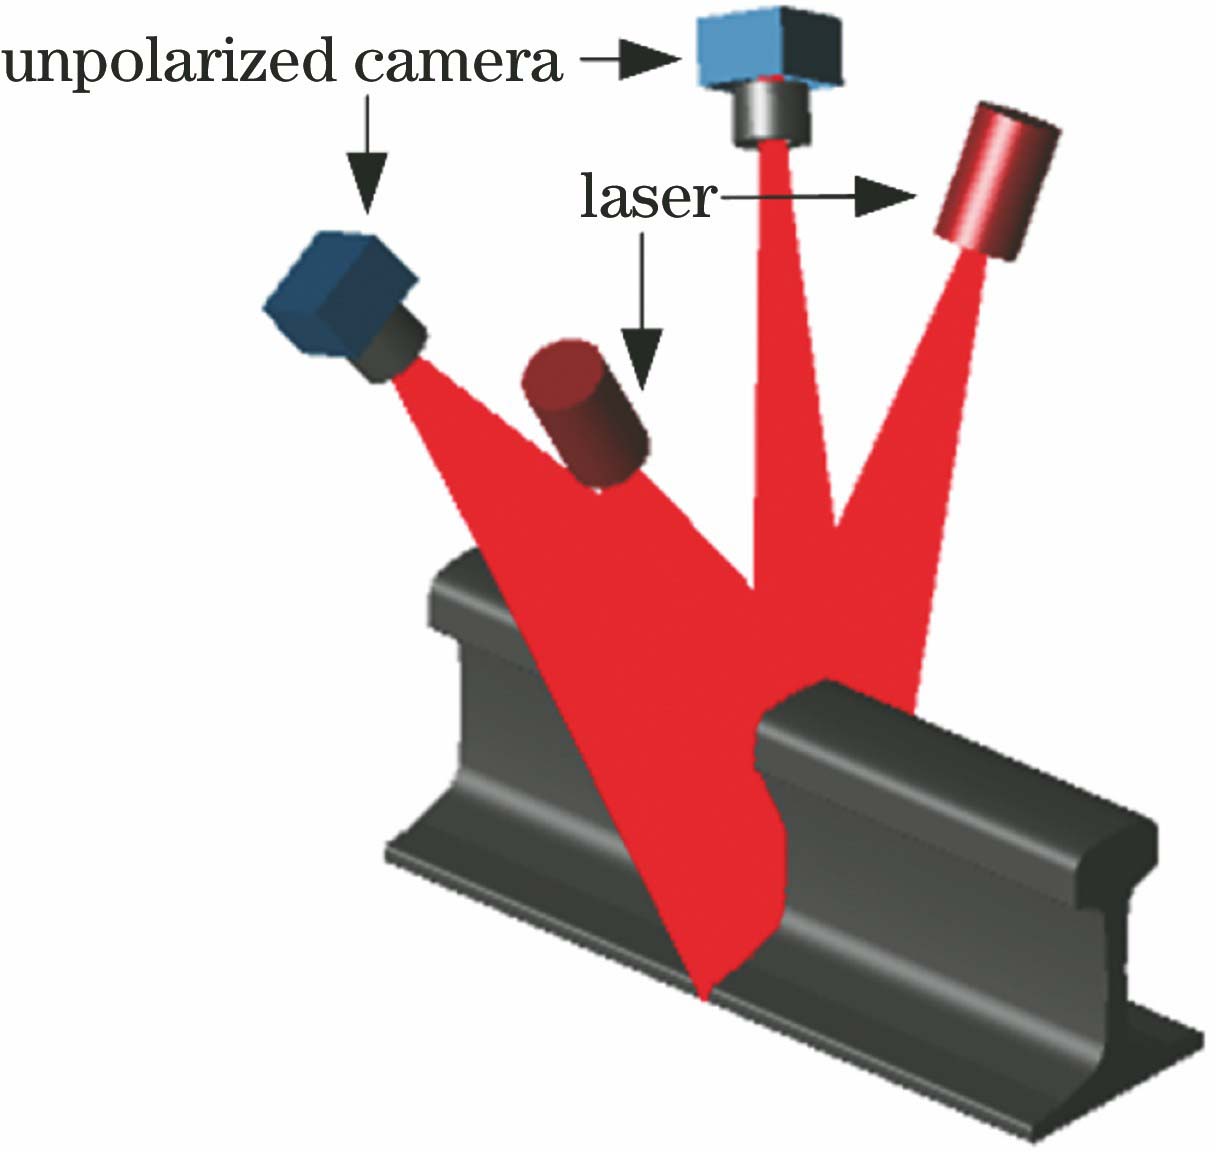 Principle diagram of line-structured light imaging of rail profile based on traditional unpolarized camera